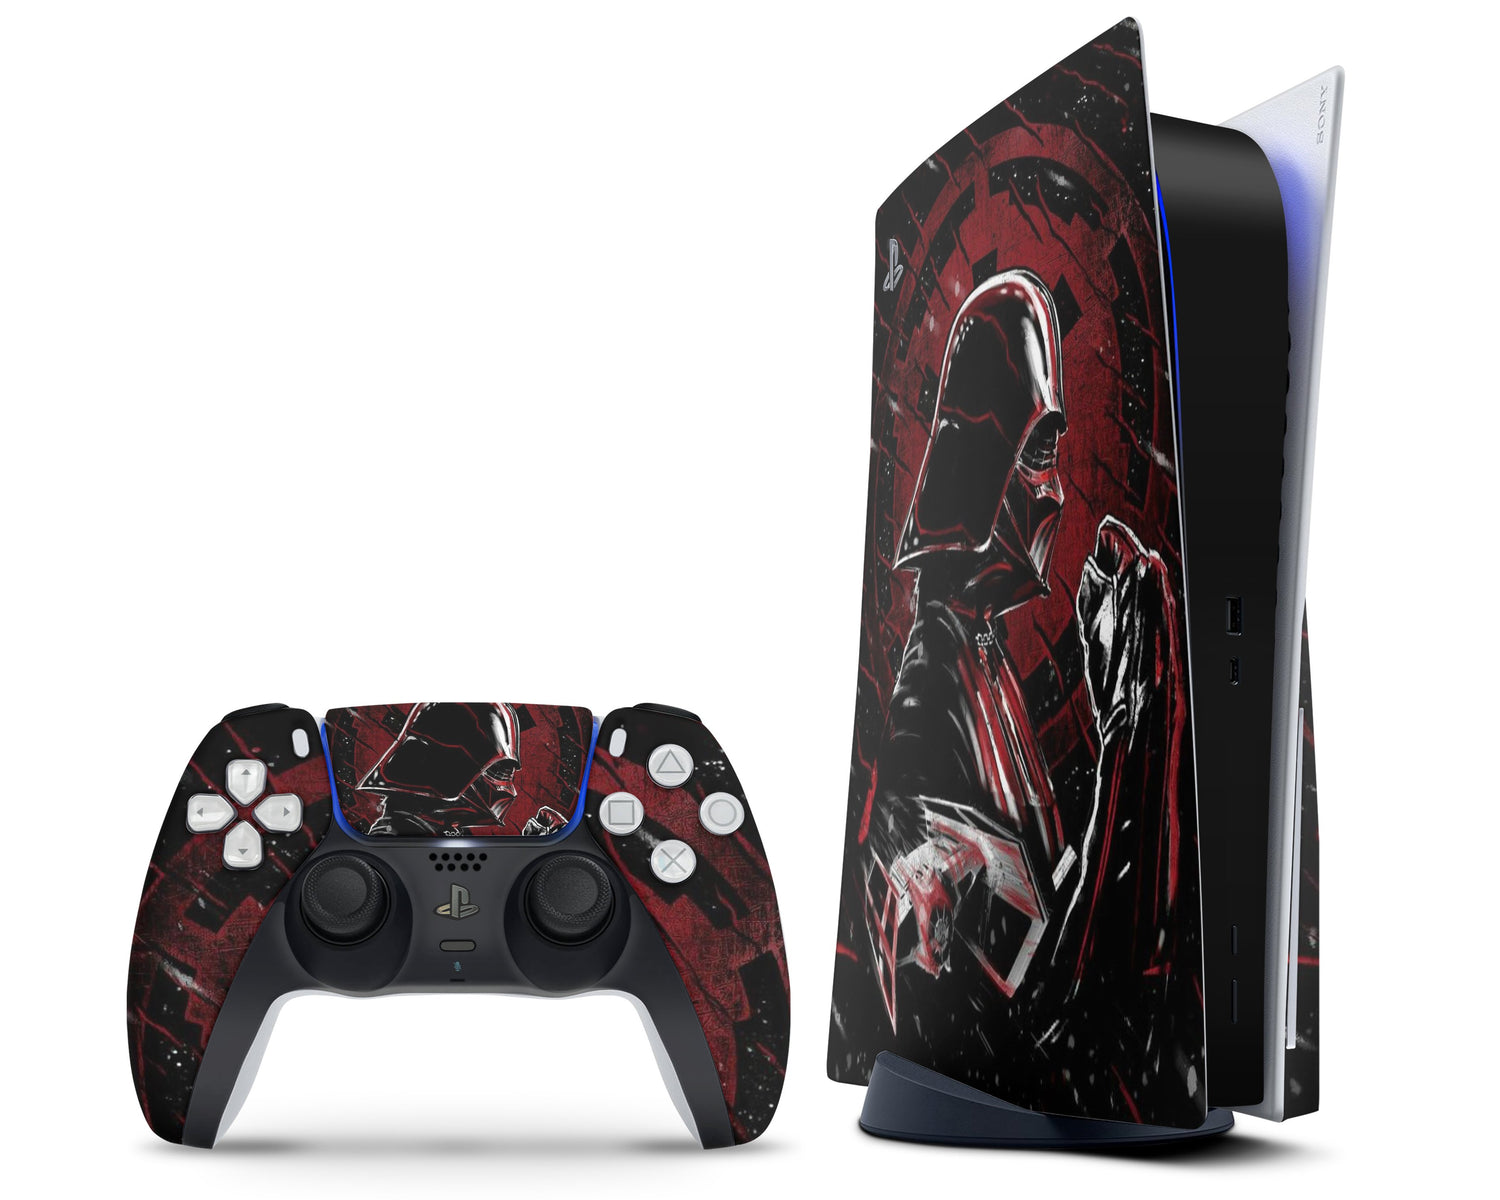 PS5 Skin Vinyl Decal Sticker Anime Game Console Skins Sticker + Controller  Sticker Skin Cover Wraps for Playstation 5 - TN-PS5 Disk-3523 | Catch.com.au